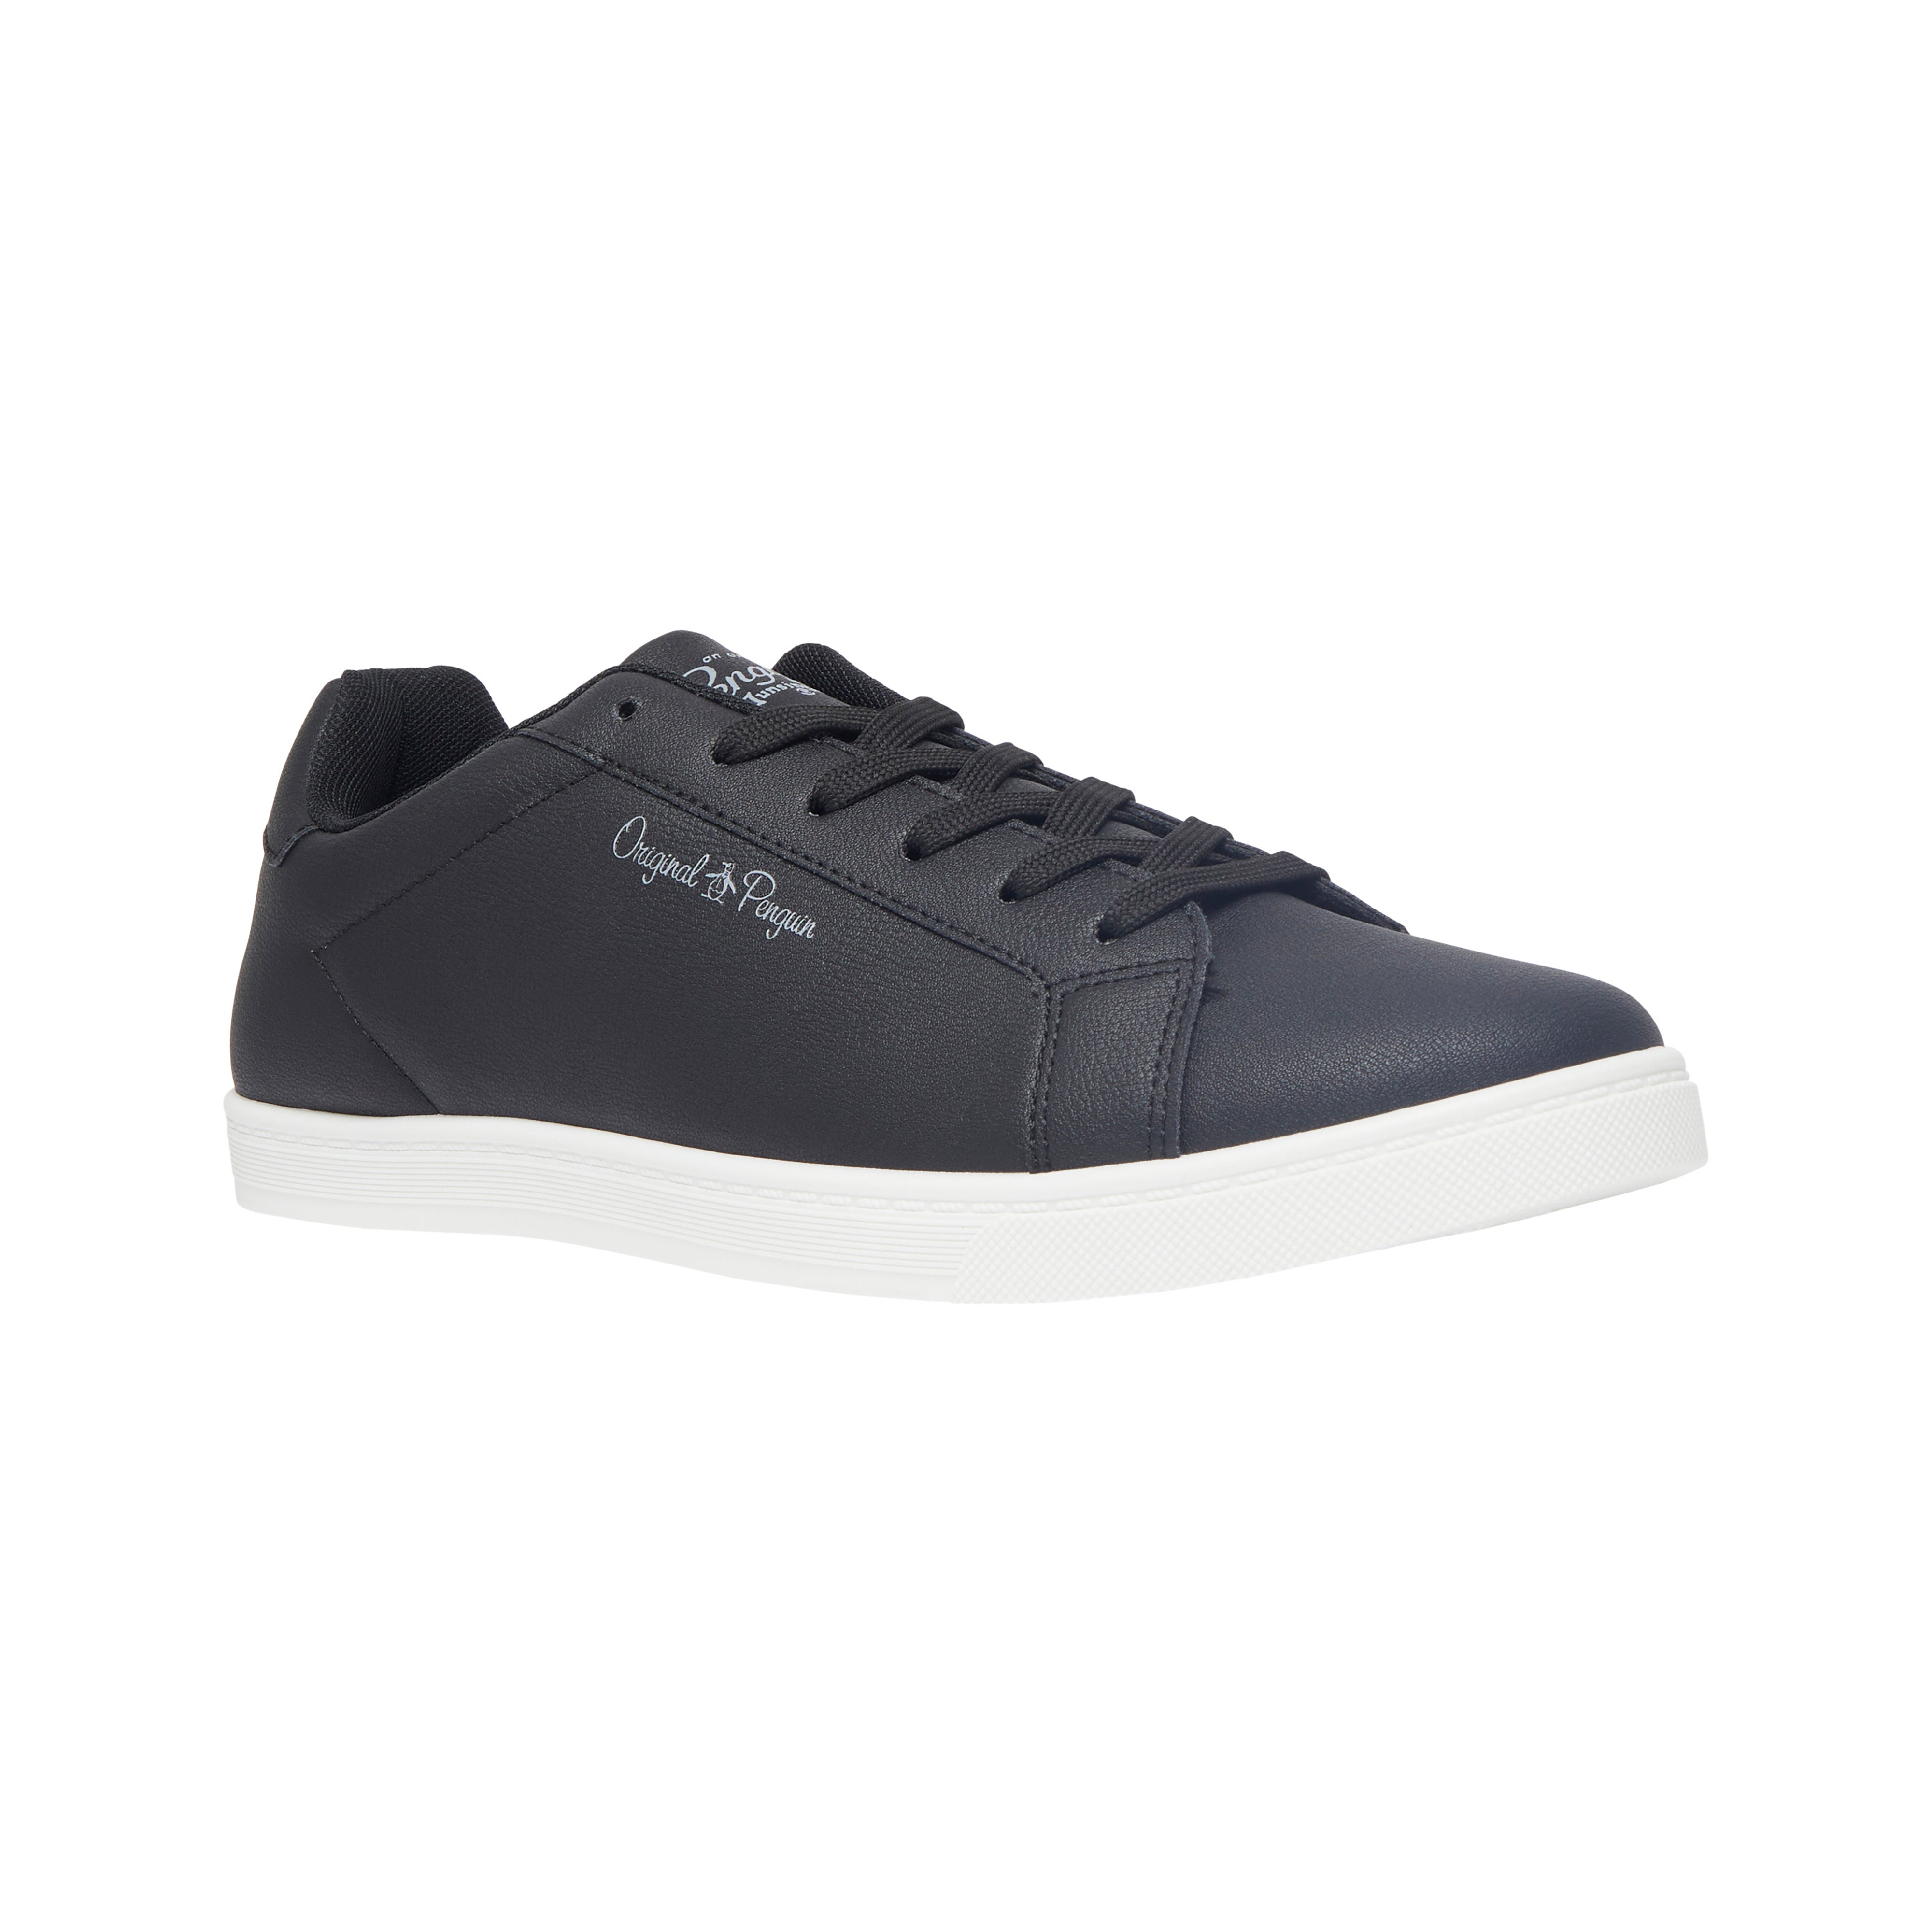 View Galvin Trainer In Black information